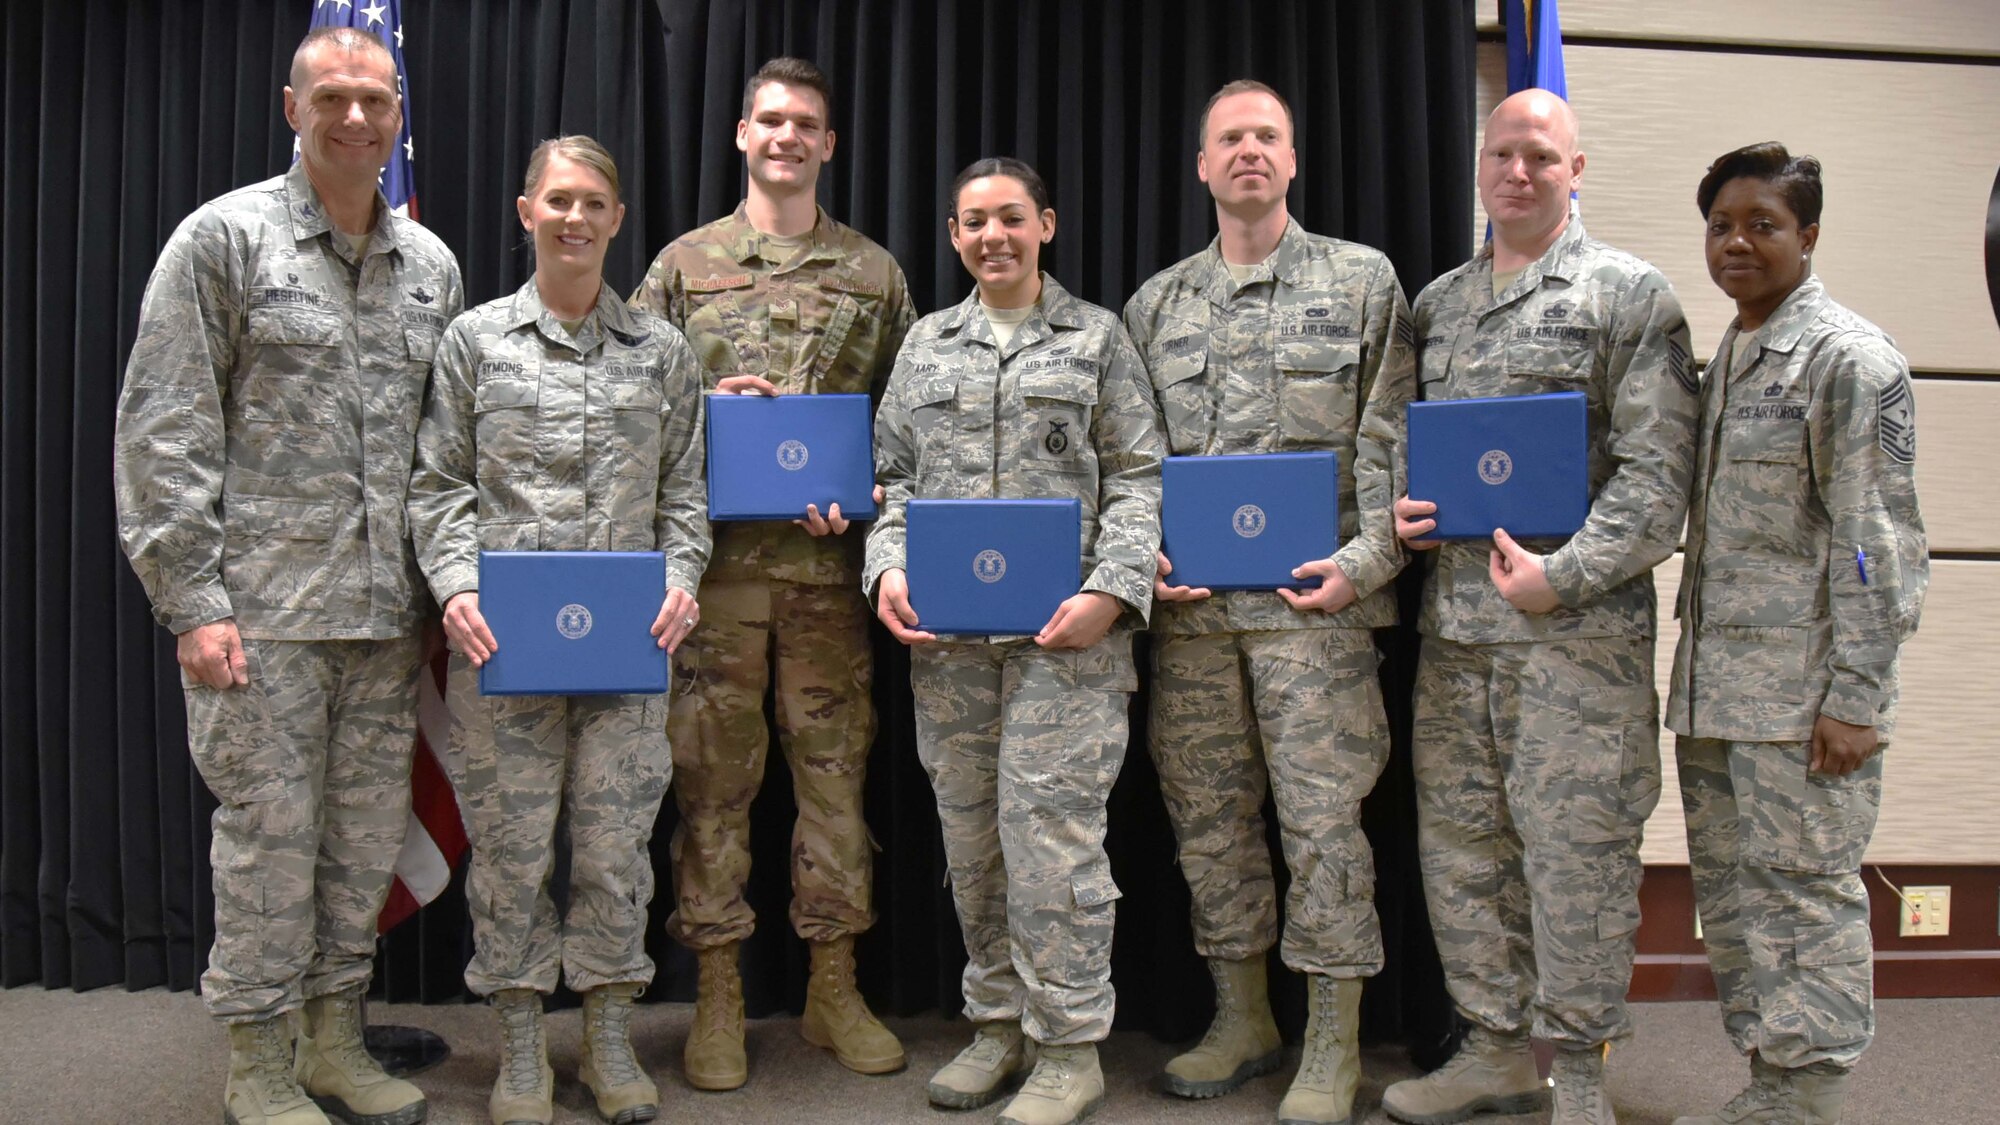 Congratulations to all the 2018 Community College of the Air Force graduates. Reserve Citizen Airmen from the 931st Air Refueling Wing received their diplomas during the organization's eight Community College of the Air Force Graduation Ceremony, Feb. 3, 2019. CCAF is a worldwide multi-campus community college established to meet the educational needs of Air Force enlisted personnel.